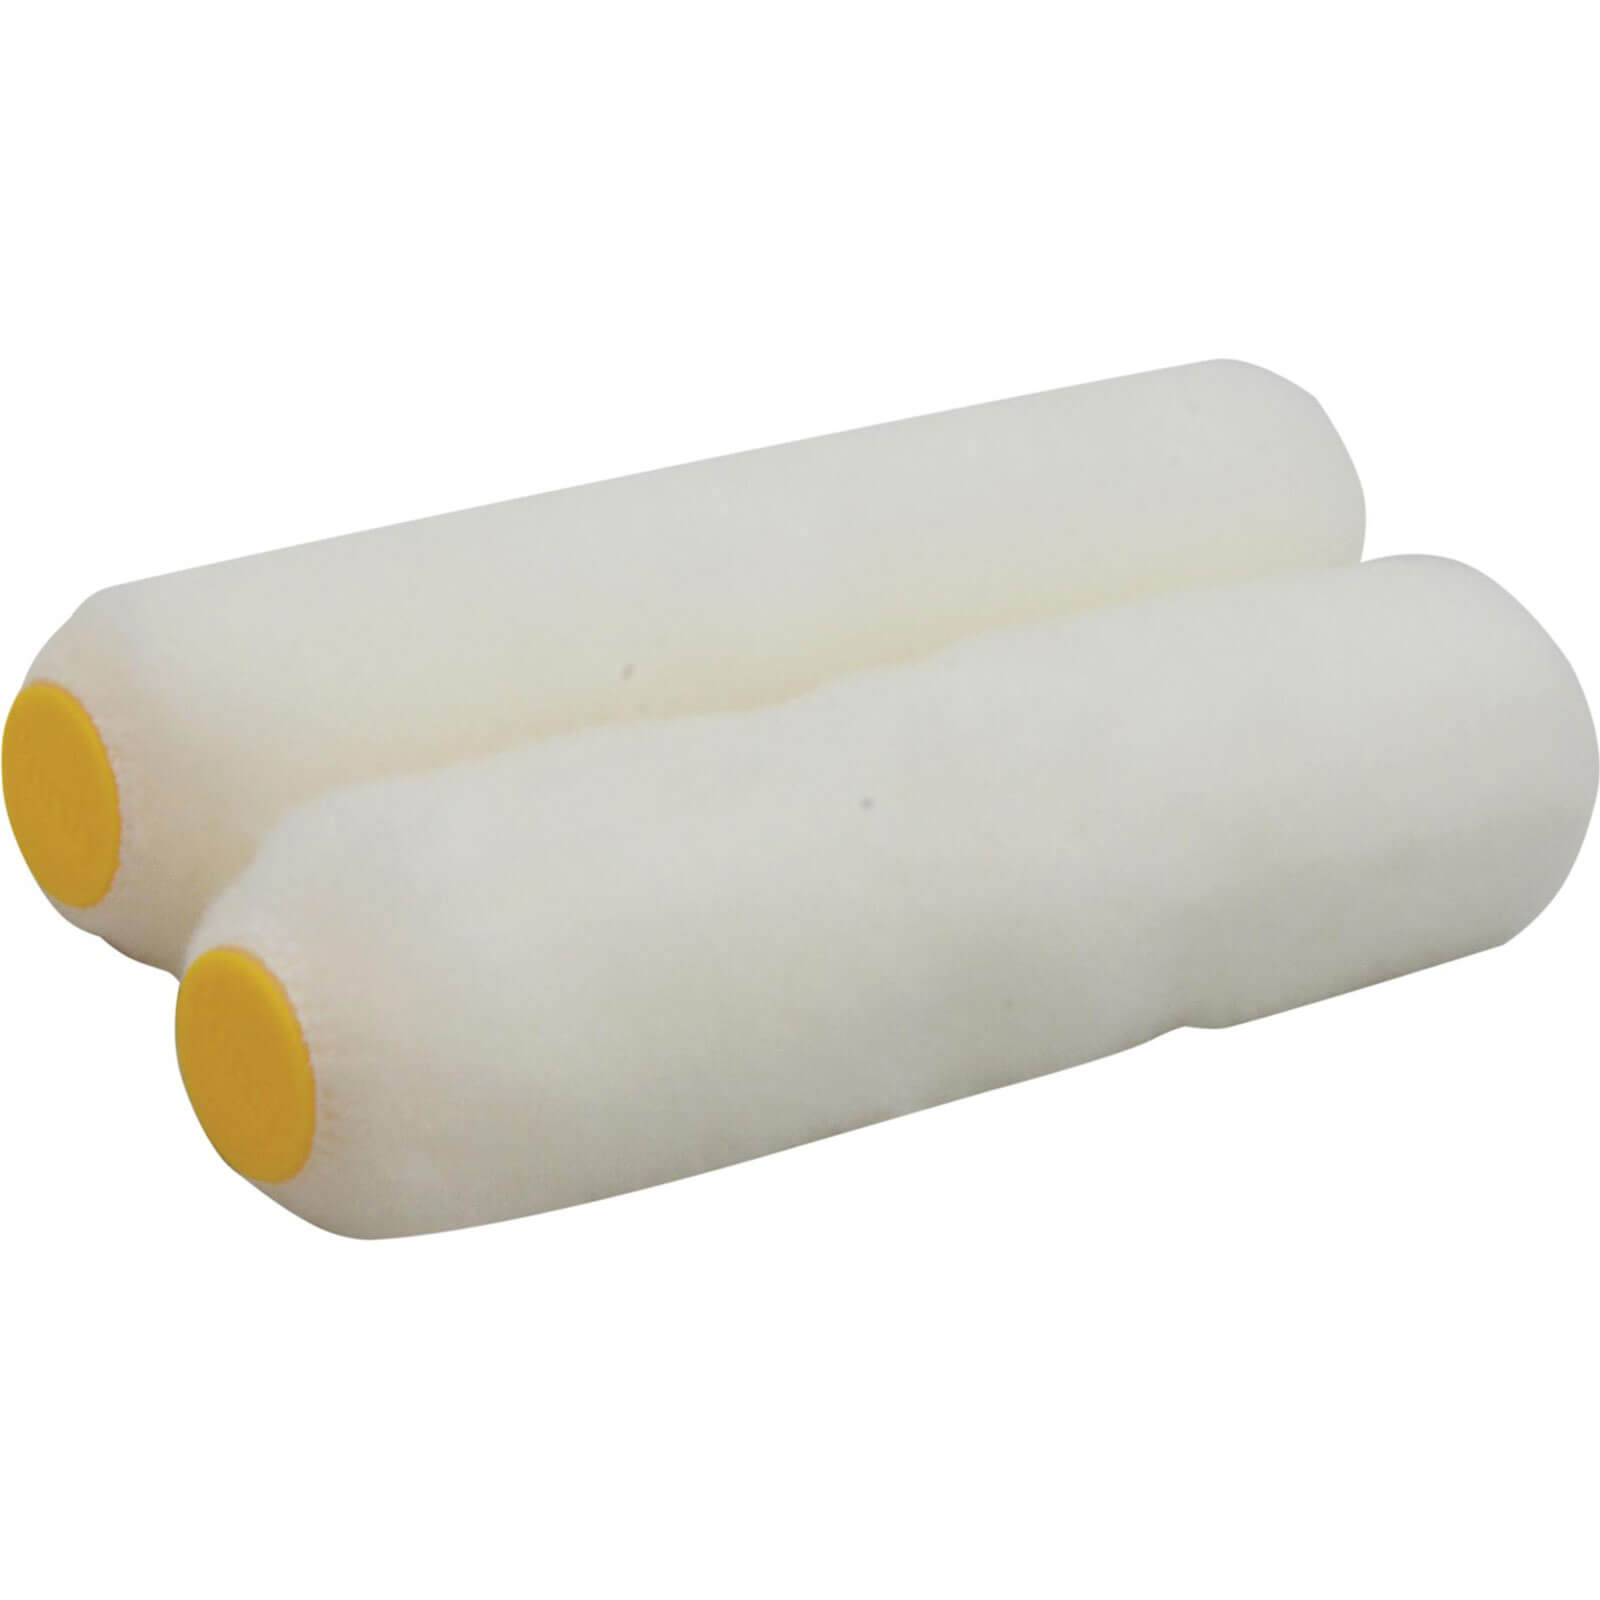 Image of Purdy Jumbo Mini White Dove Paint Roller Sleeve 19mm 165mm Pack of 2